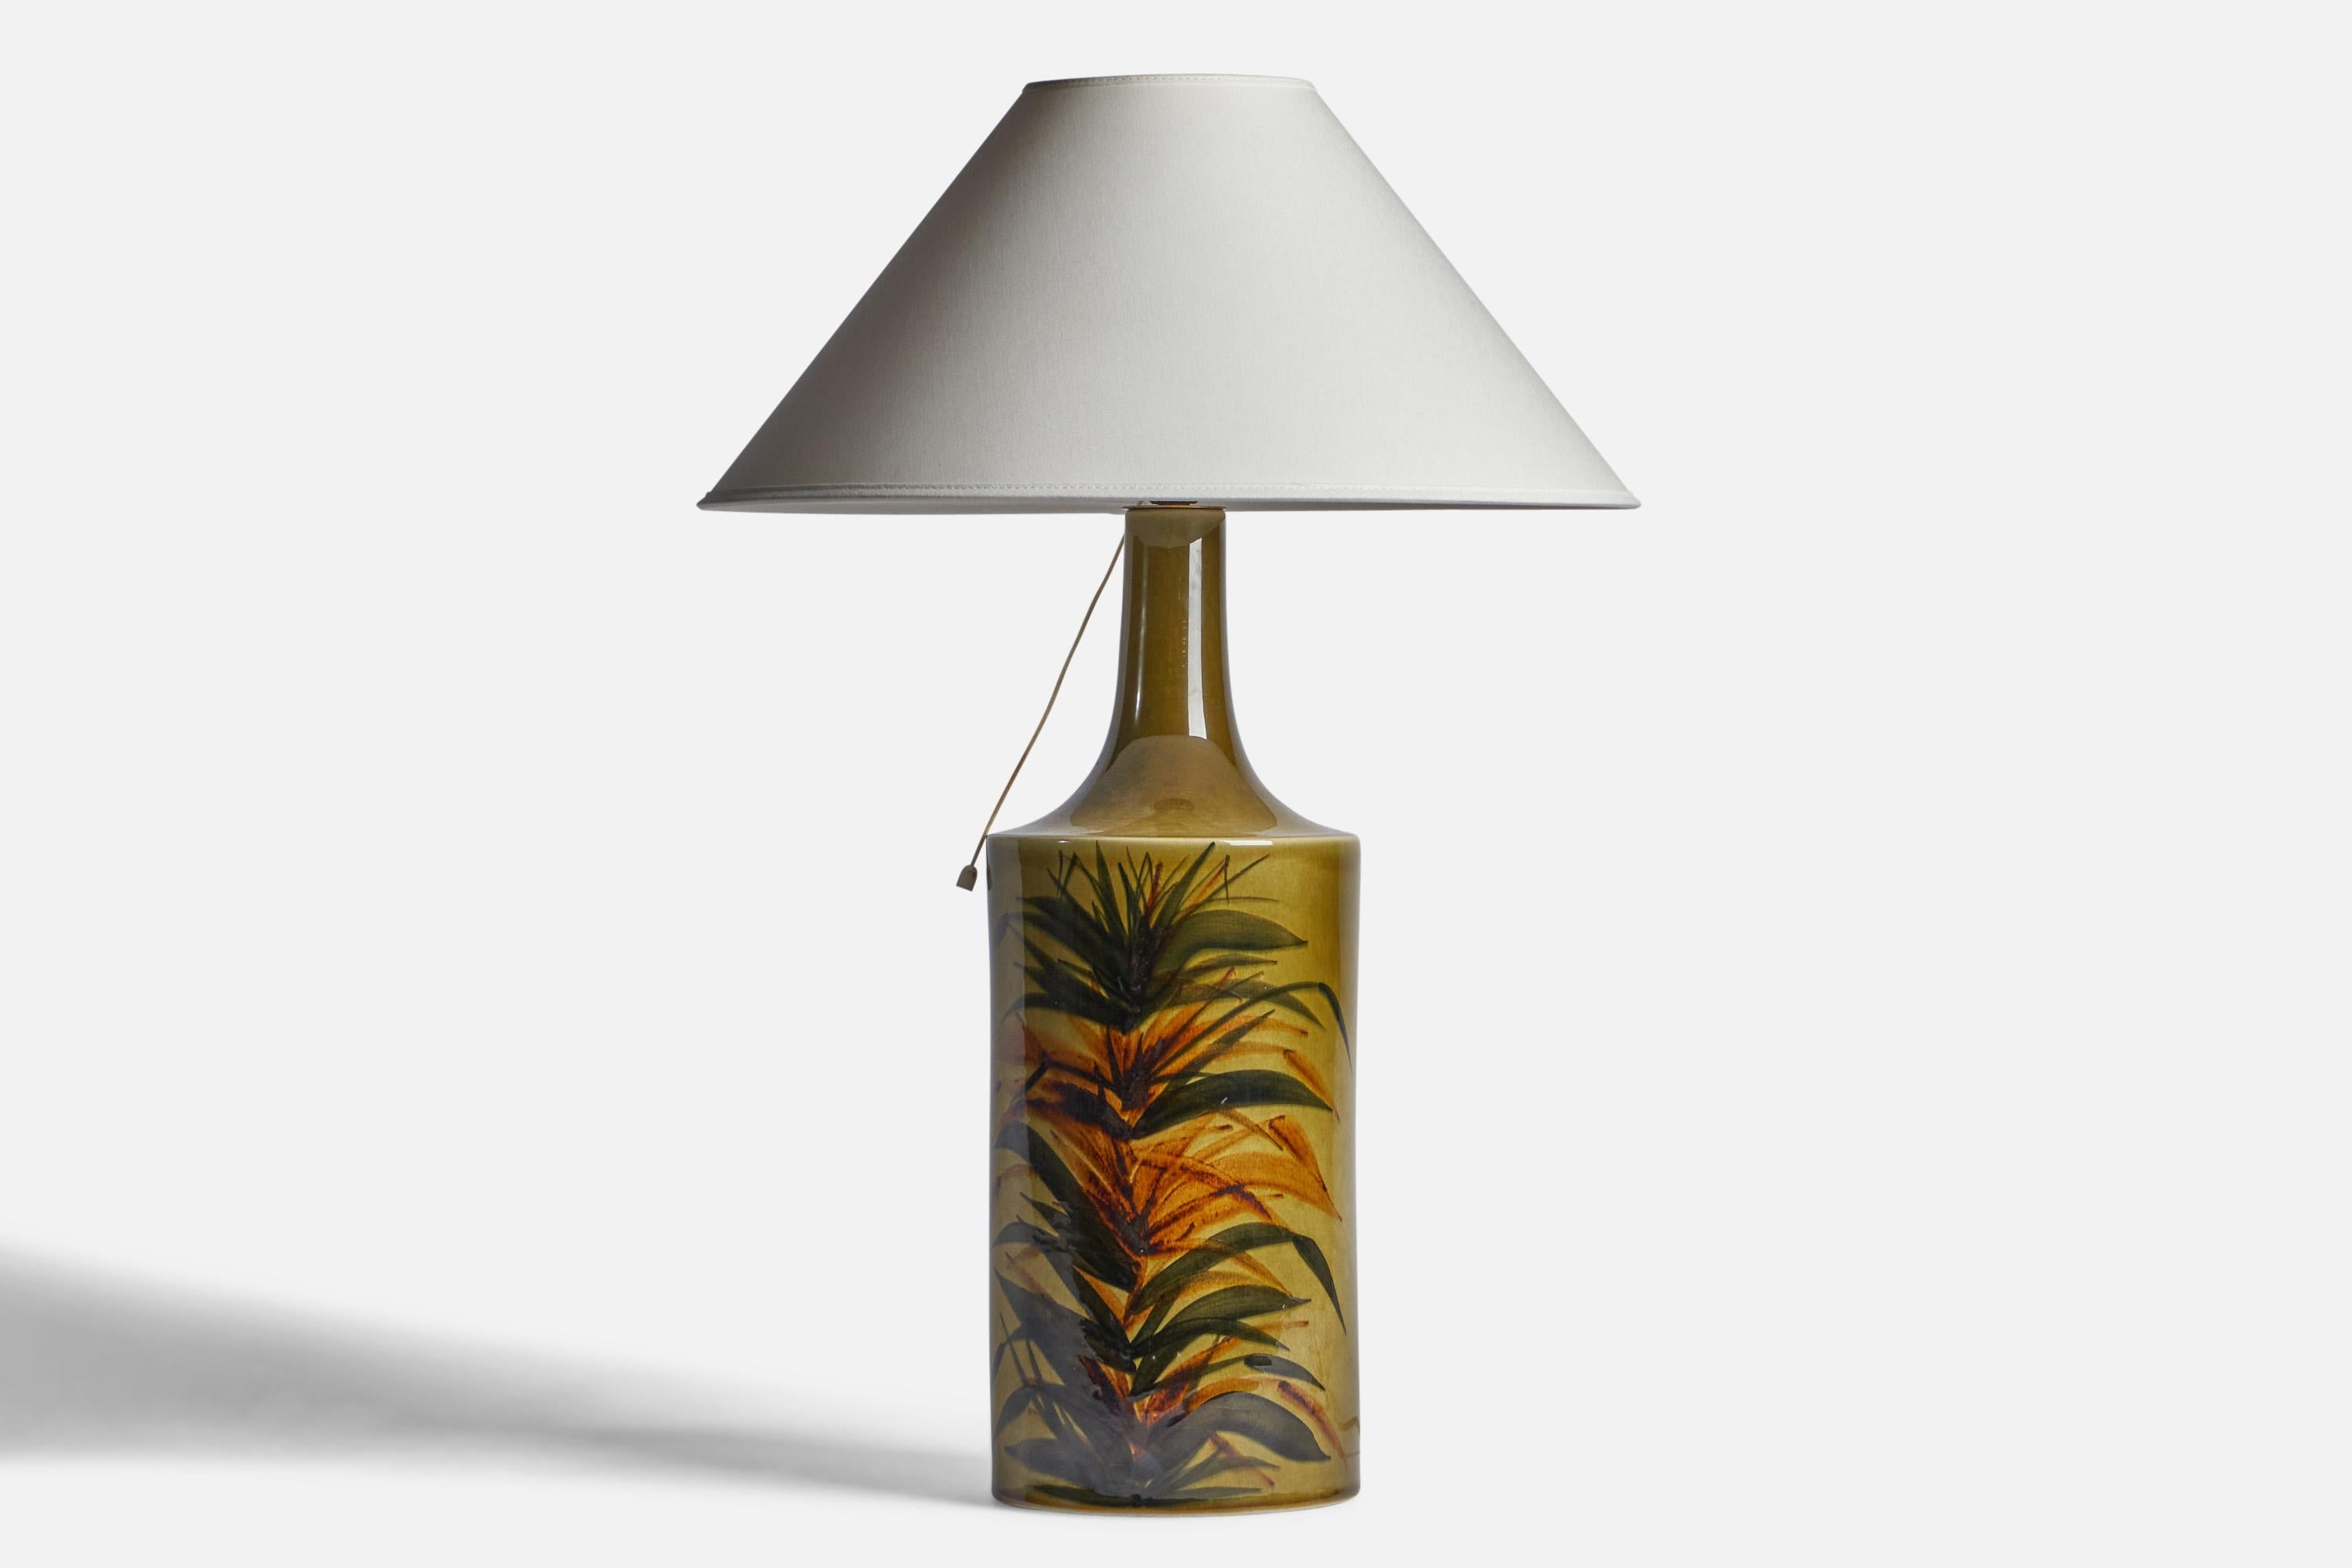 A hand-painted green-glazed stoneware table lamp designed by Gunvor Olin-Grönquist and produced by Arabia, Finland, c. 1950s.

Dimensions of Lamp (inches): 19.5” H x 6.3” Diameter
Dimensions of Shade (inches): 4.5” Top Diameter x 16” Bottom Diameter